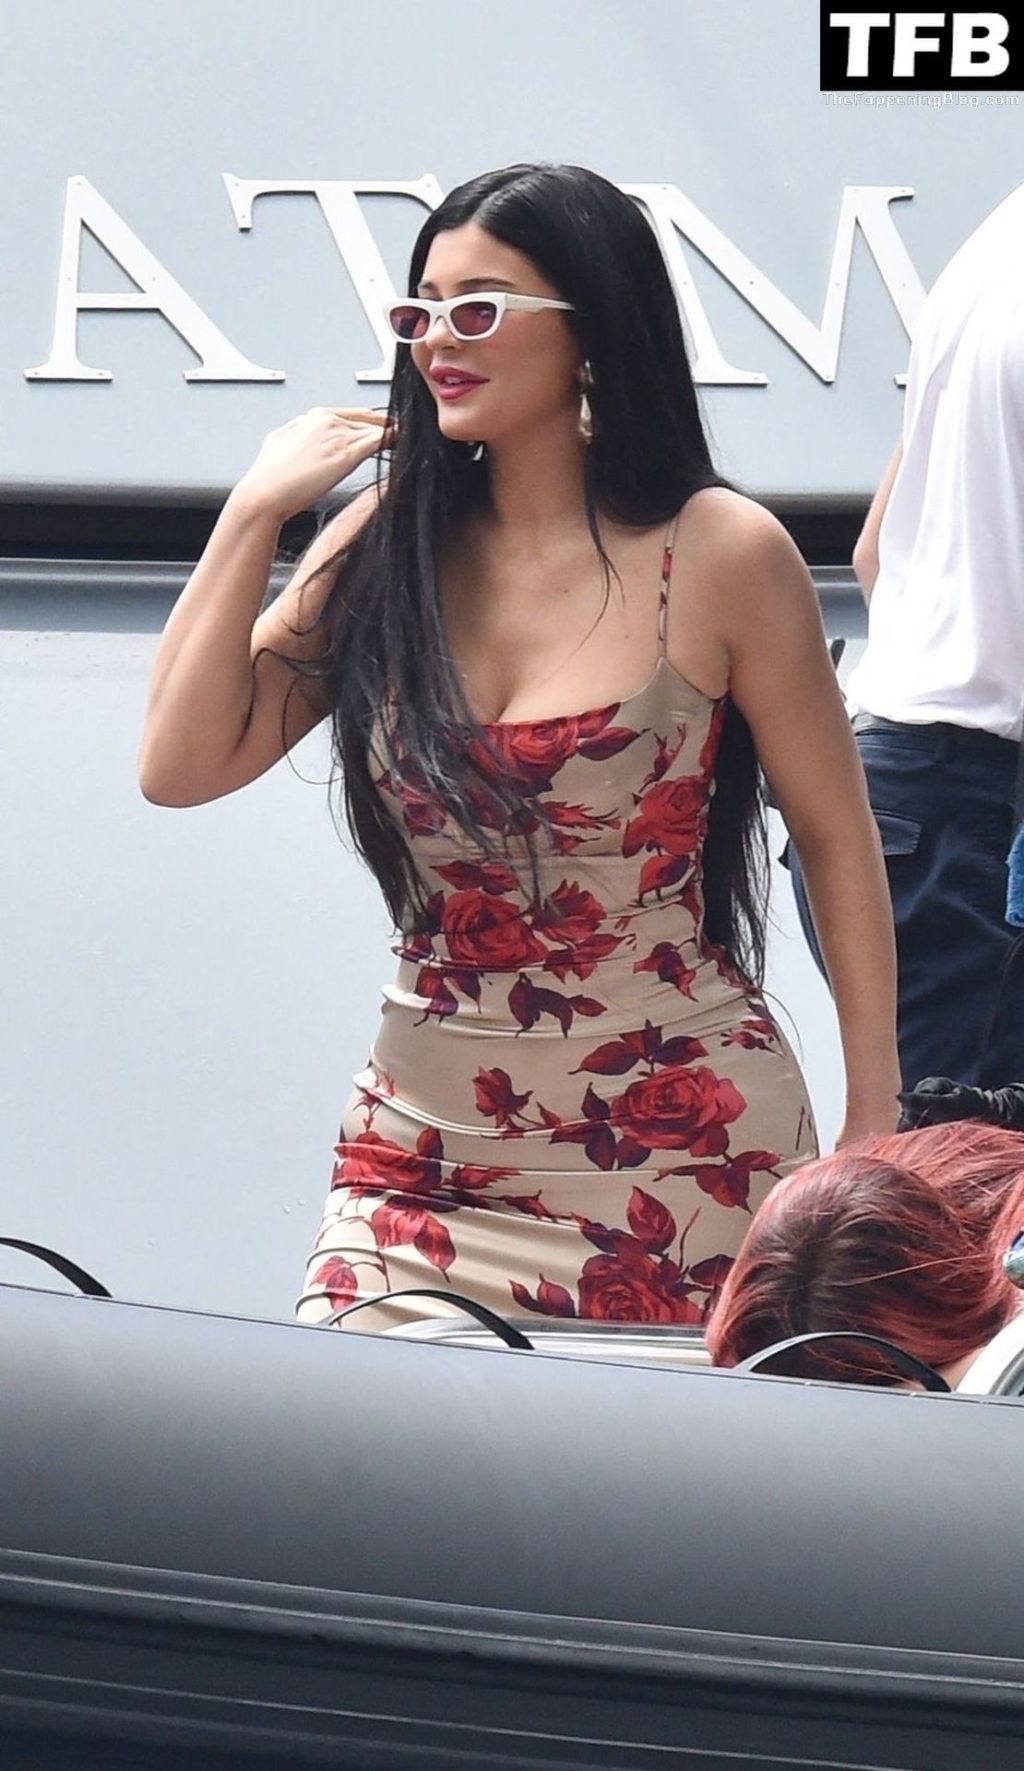 Kylie Jenner Sexy The Fappening Blog 2 1024x1771 - Kylie Jenner Flaunts Her Curves in Portofino (32 Photos)